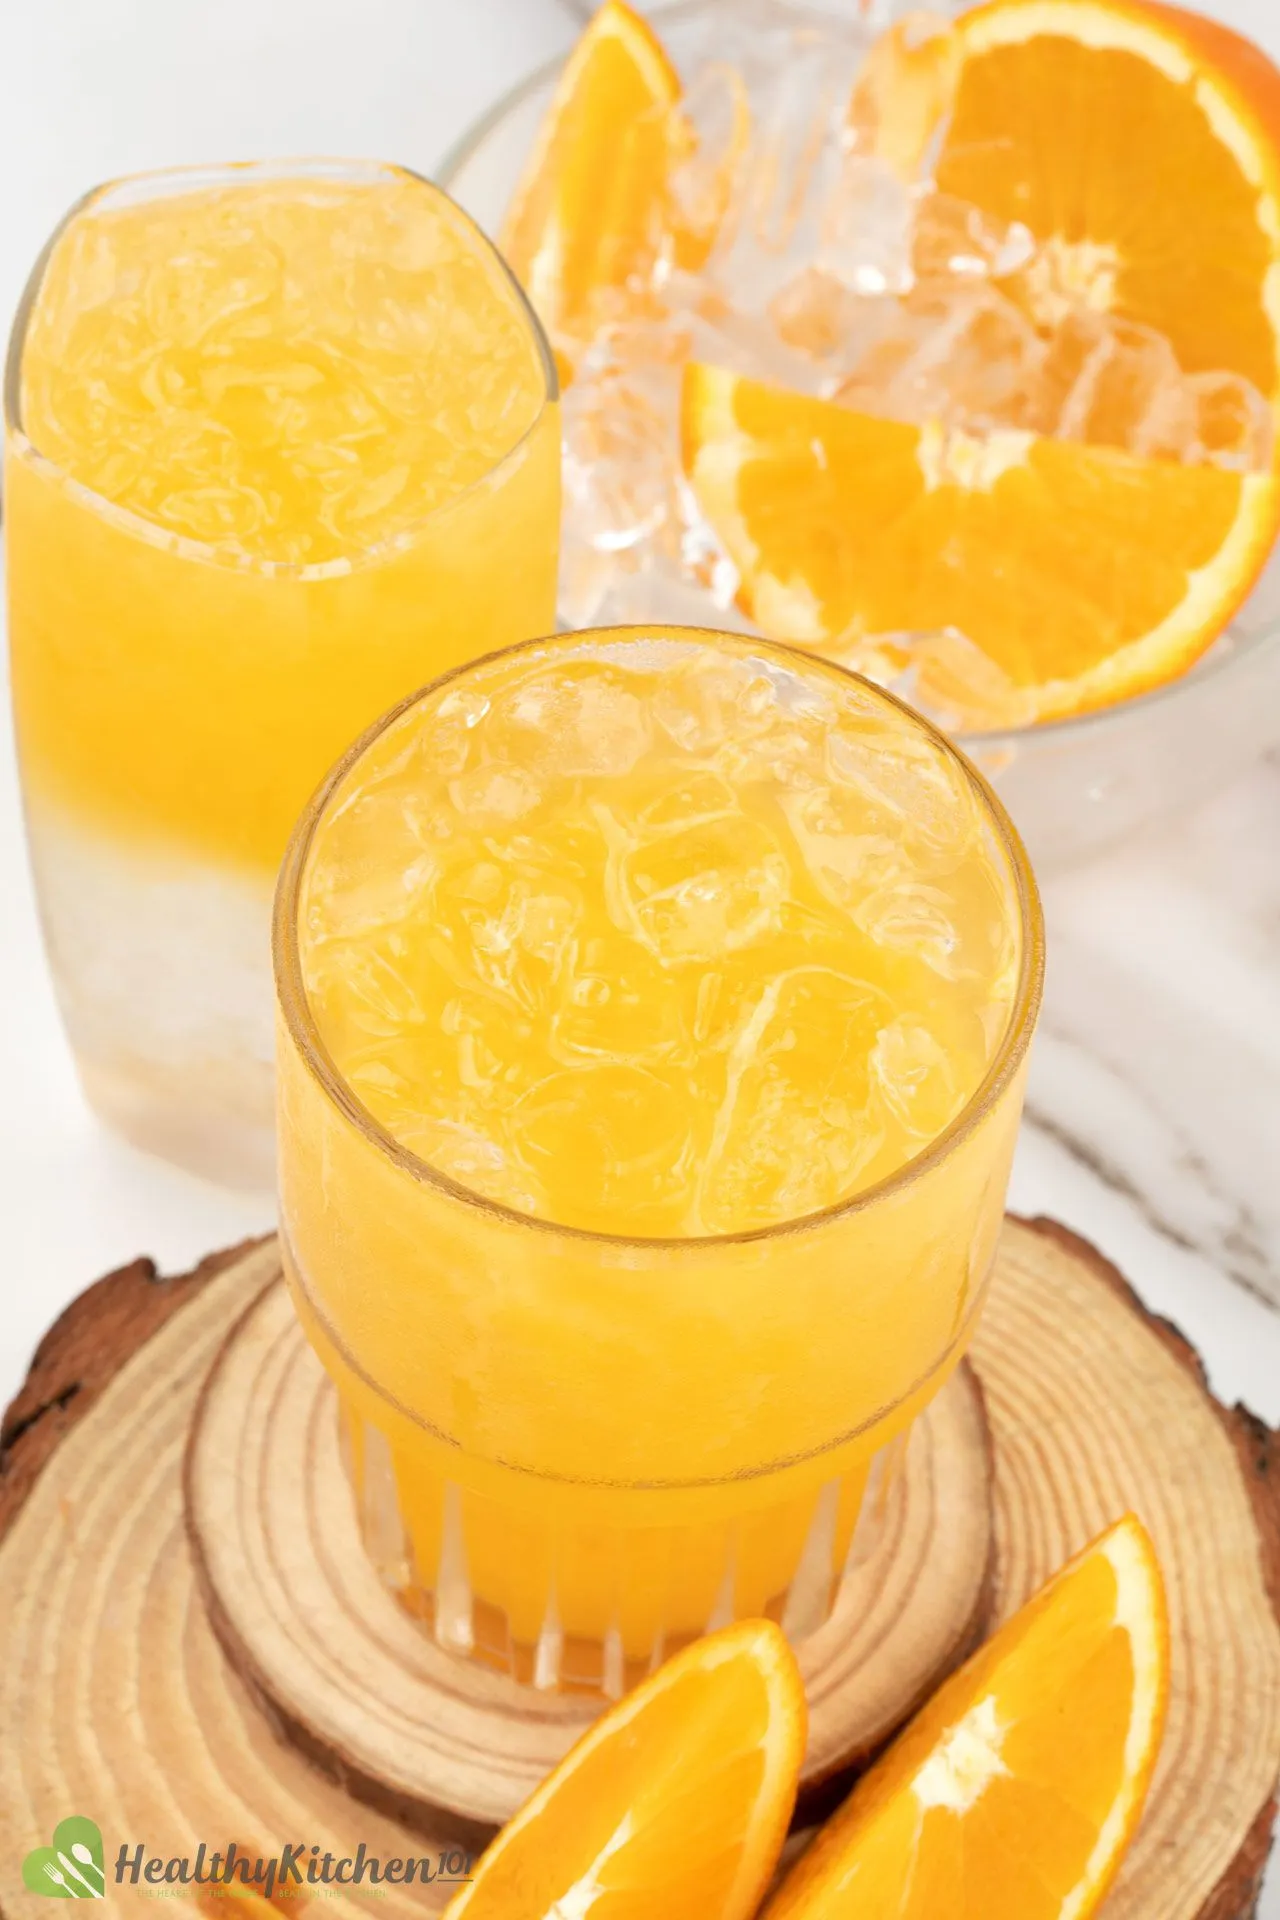 Foolproof Vodka And Orange Juice Recipe That Doesn T Disappoint,Turkey Legs State Fair